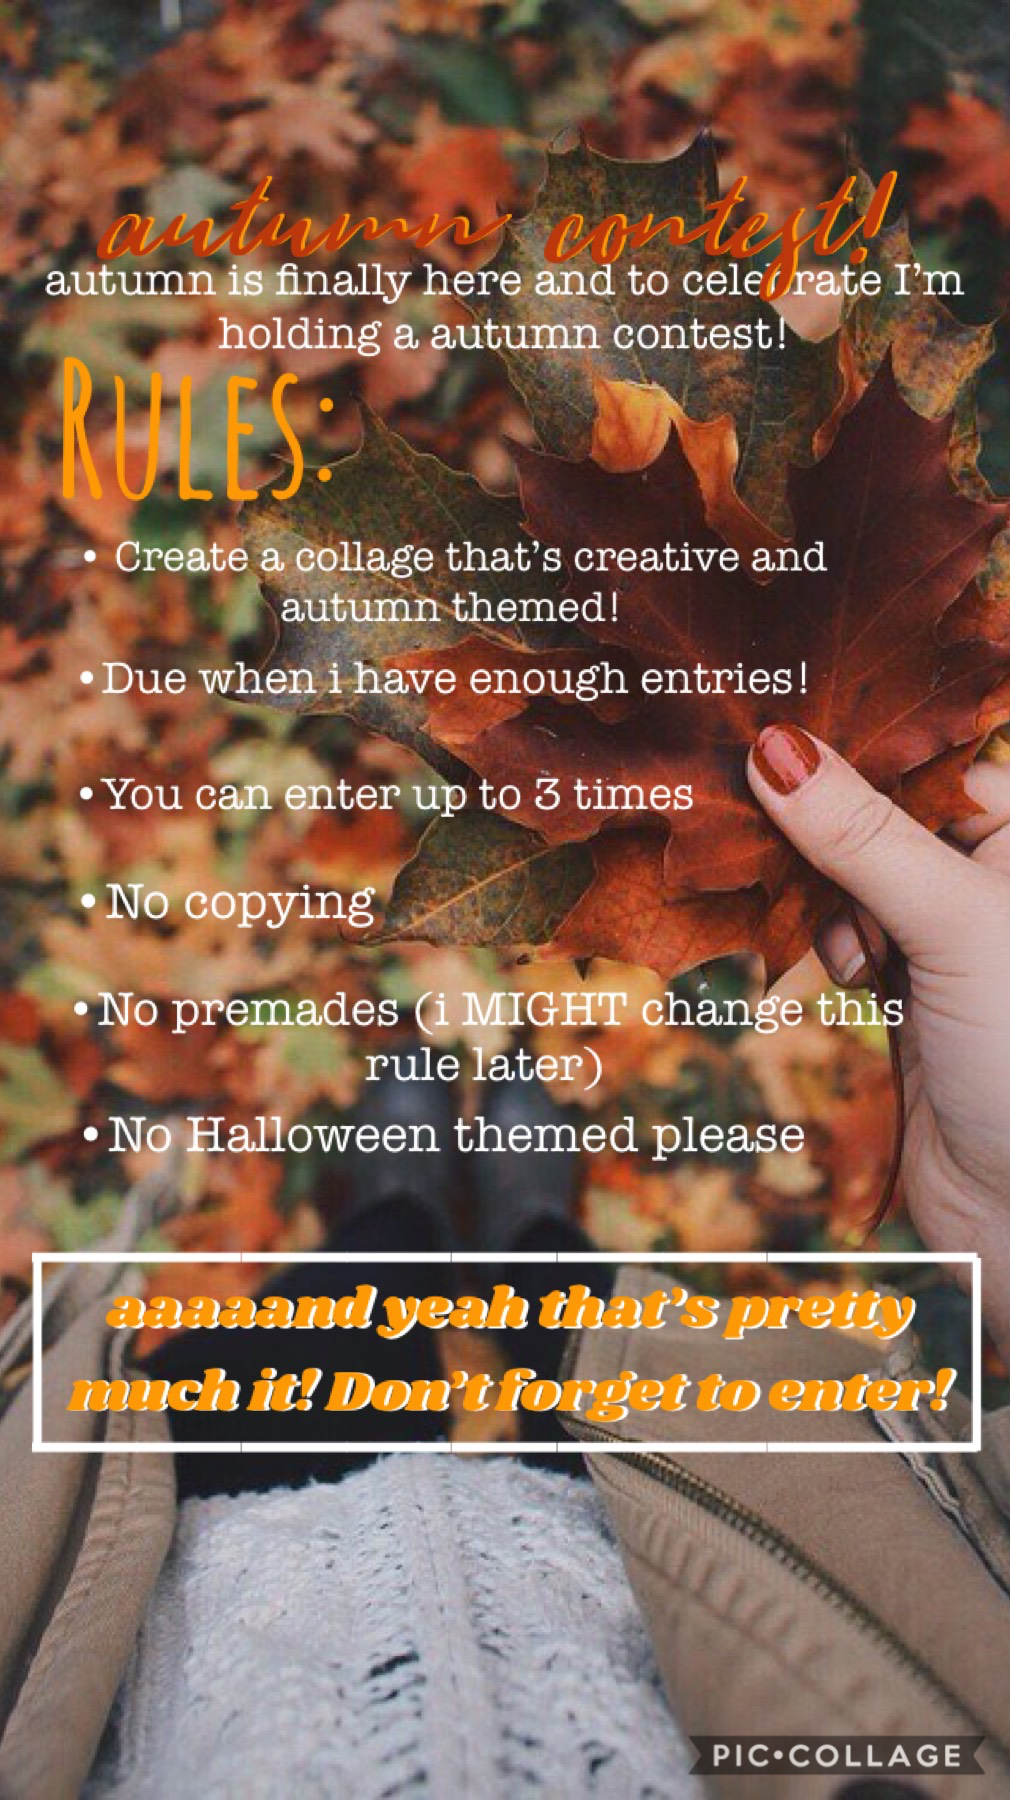 ITS CONTEST TIMEEEE (tapity)
 I’m really excited because fall is my favorite season 😅🍁🍎🎃 Please enter!!
Idk about the premades it depends on how much entries i get 😐
SOTD: -CatsForever- (Congrats on 10k!!)
And that’s all for now my 0ats have a great rest 